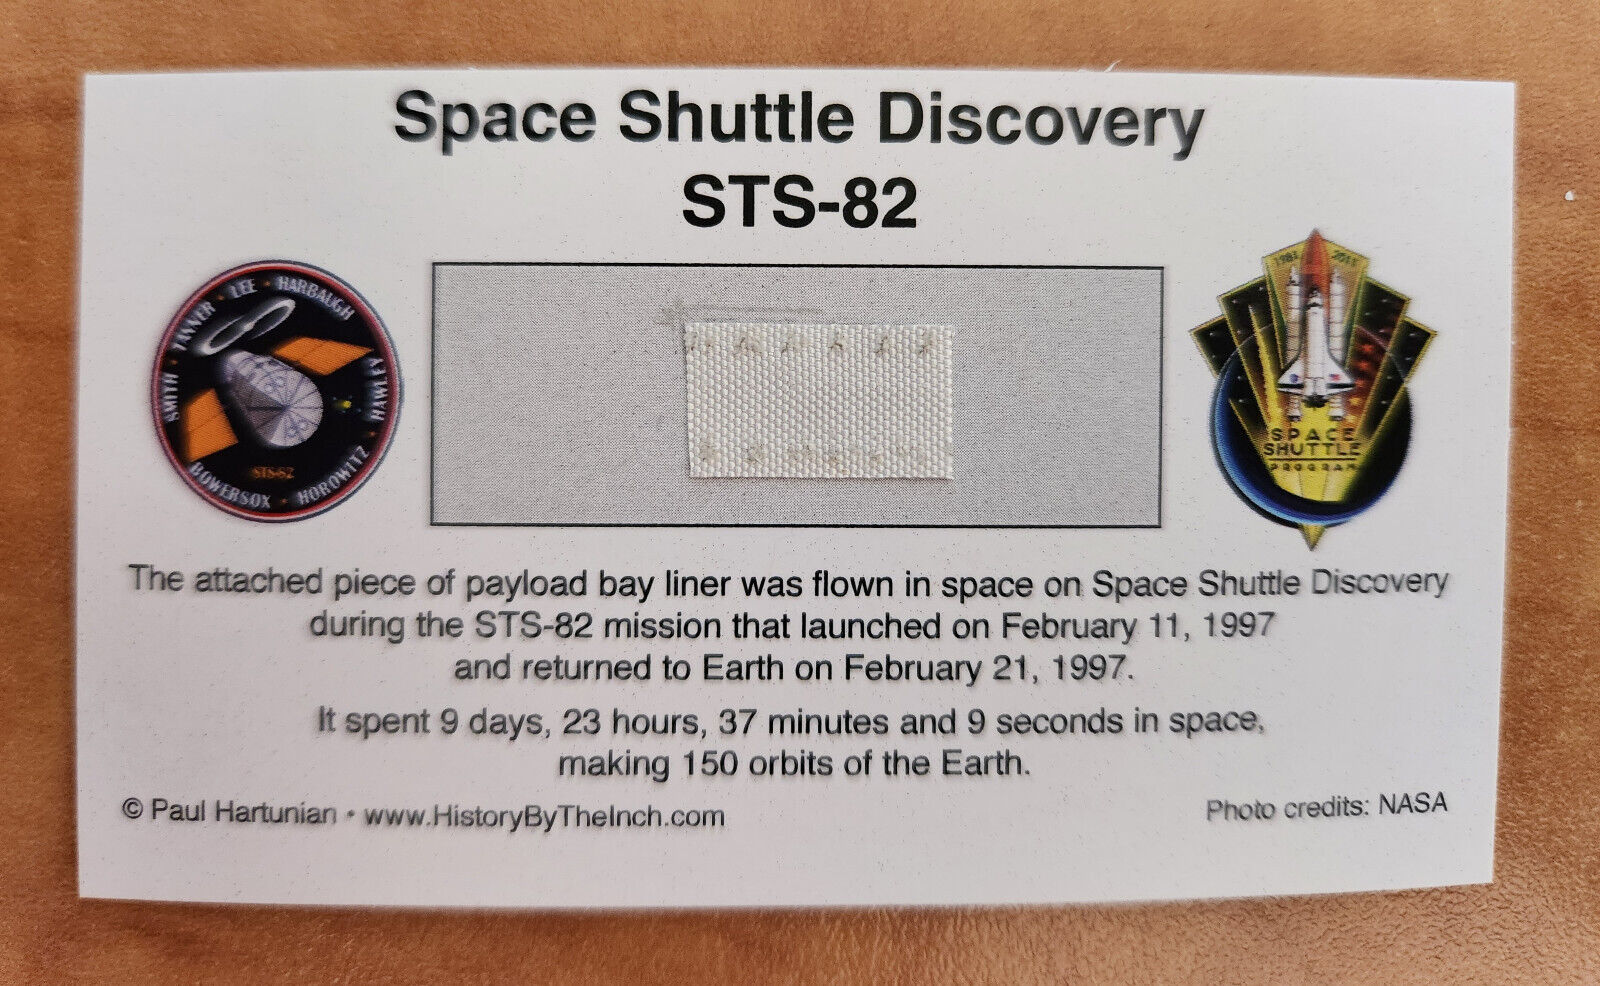 Own a Genuine Piece of Flown Space Shuttle Discovery STS-82 Only $19.95